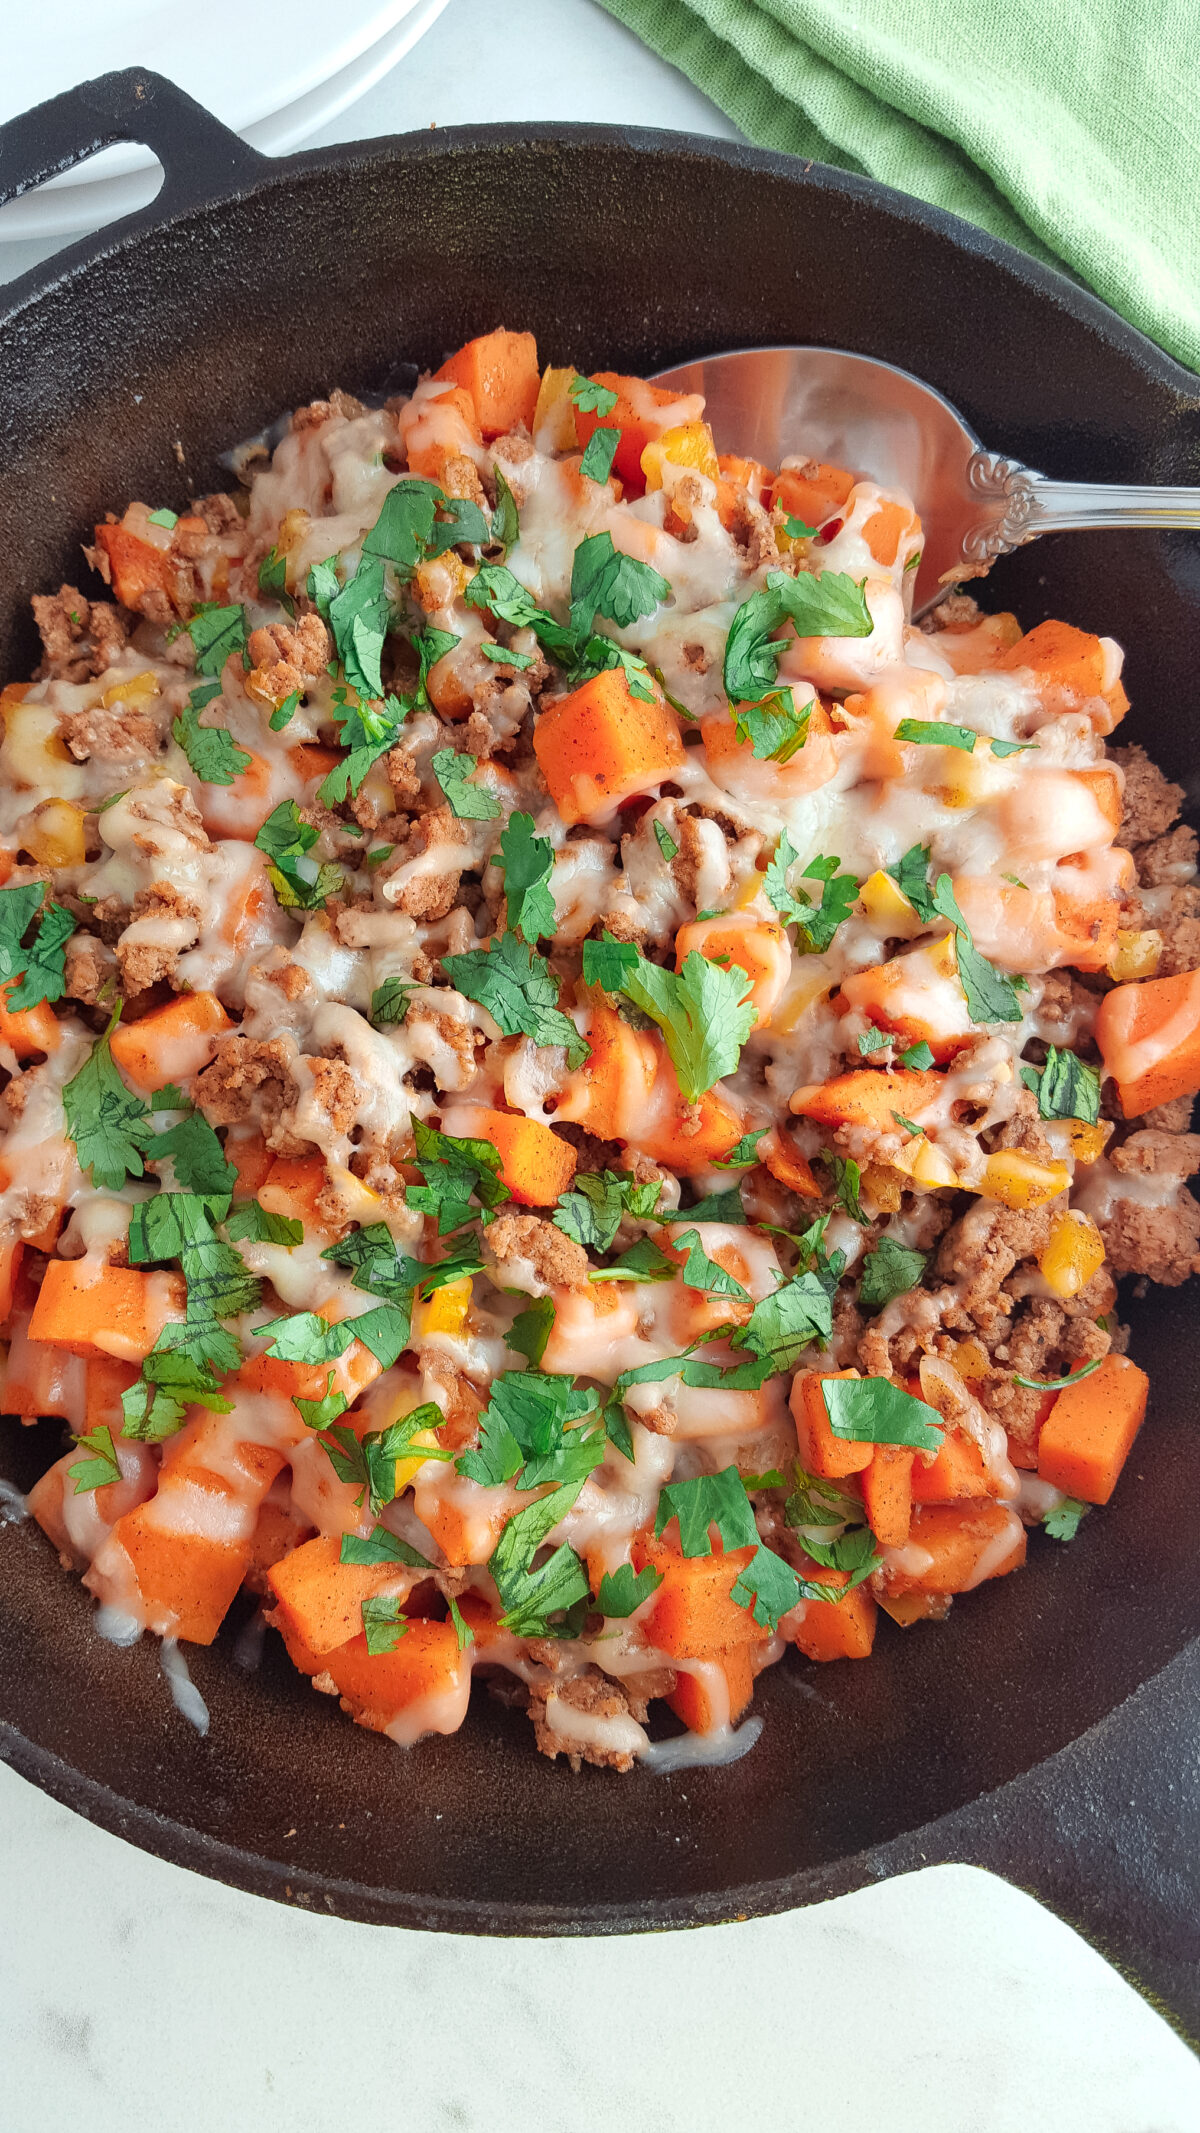 This Ground Turkey Sweet Potato Skillet is a healthy, flavourful gluten-free meal that can be made in one pot for your whole family to enjoy!